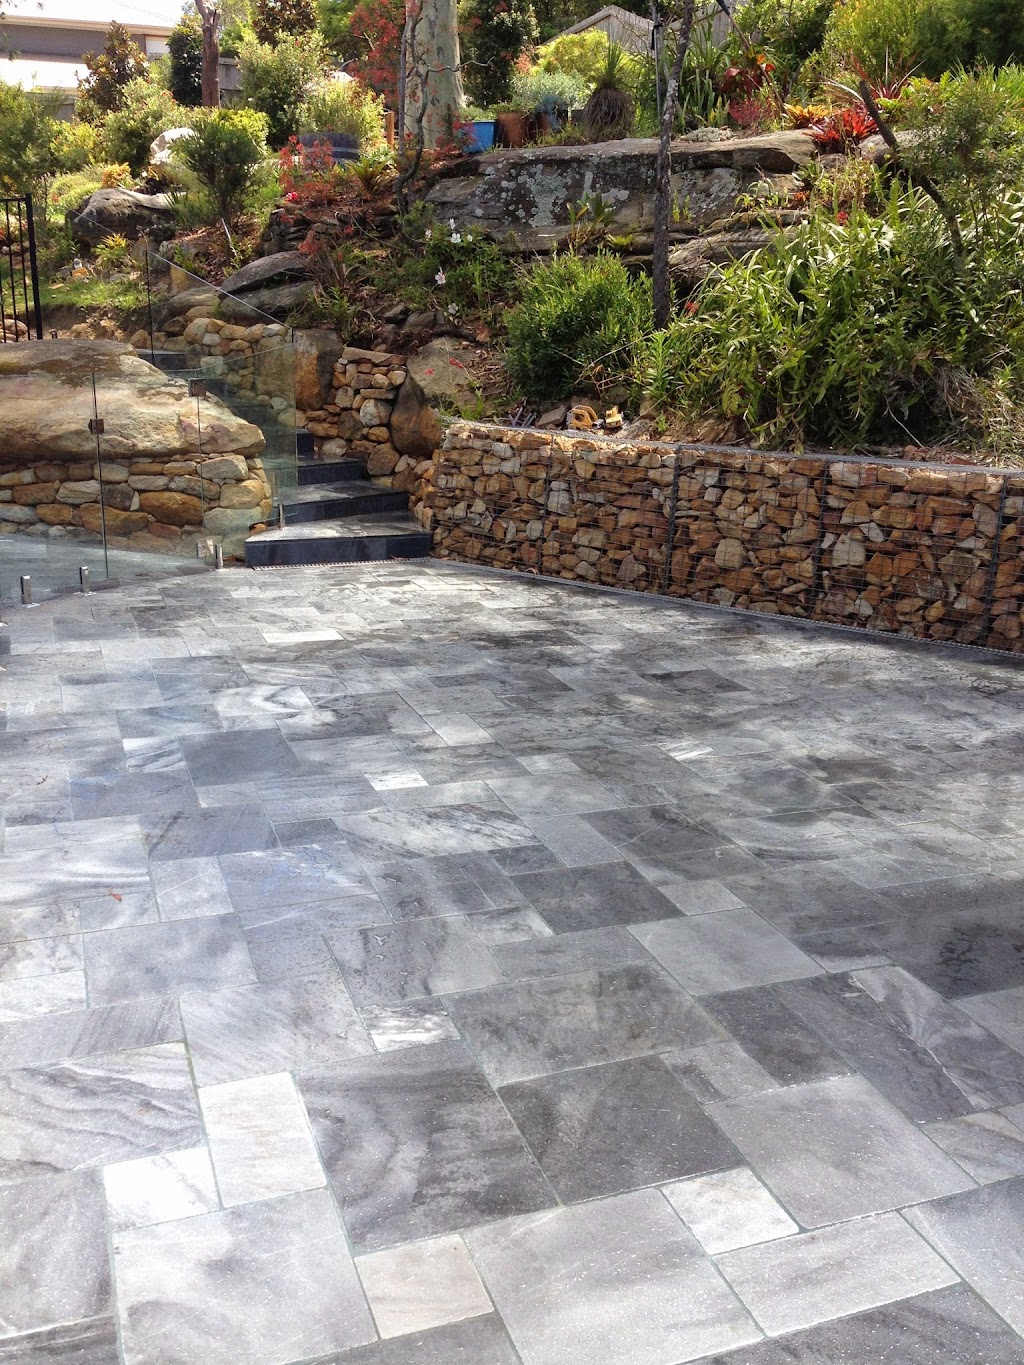 The Great Outdoors Landscape Design & Construction | 12 Maree Ave, Terrigal NSW 2260, Australia | Phone: 0423 241 627